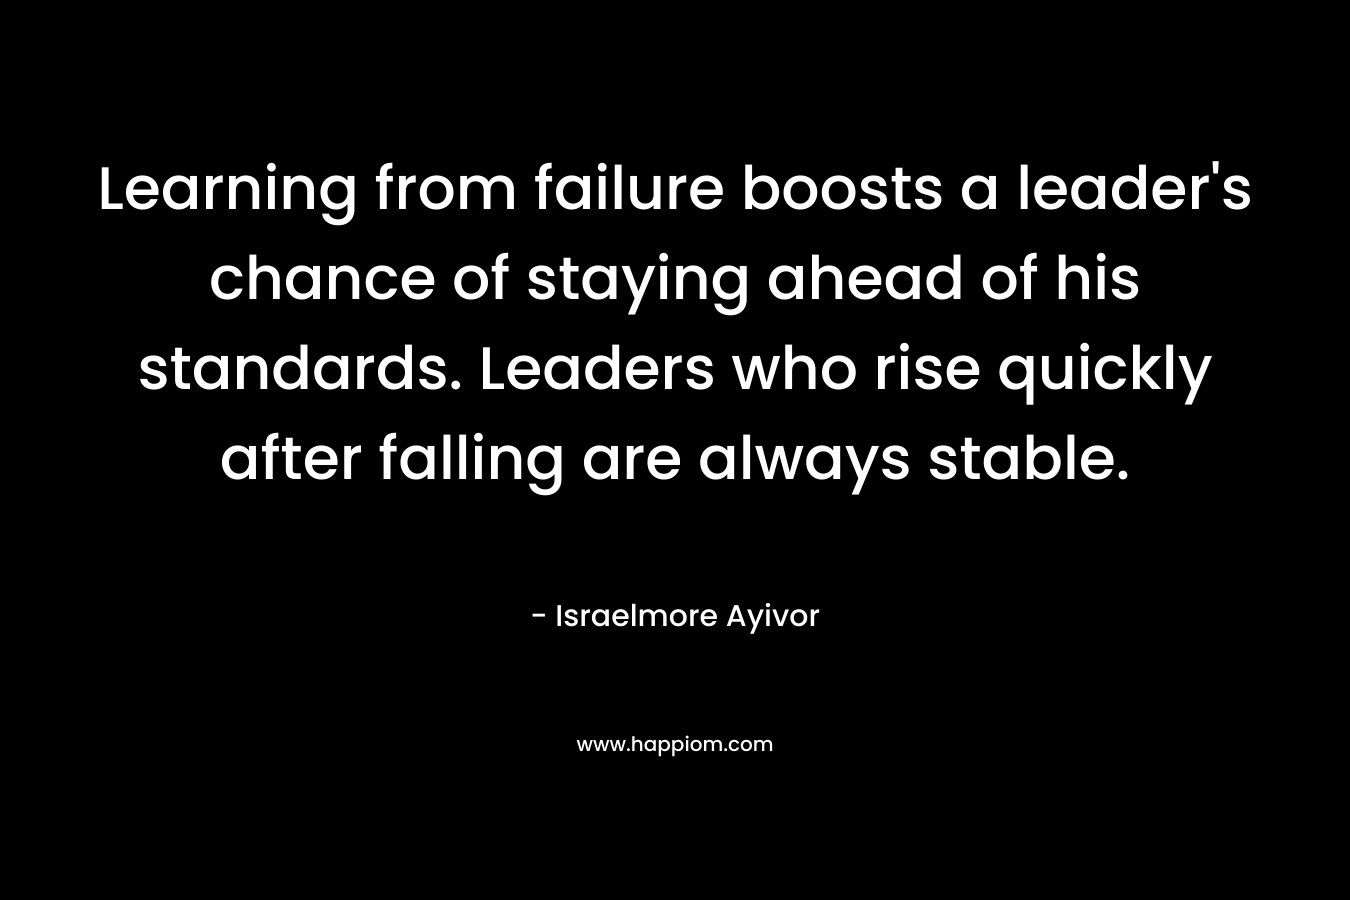 Learning from failure boosts a leader's chance of staying ahead of his standards. Leaders who rise quickly after falling are always stable.